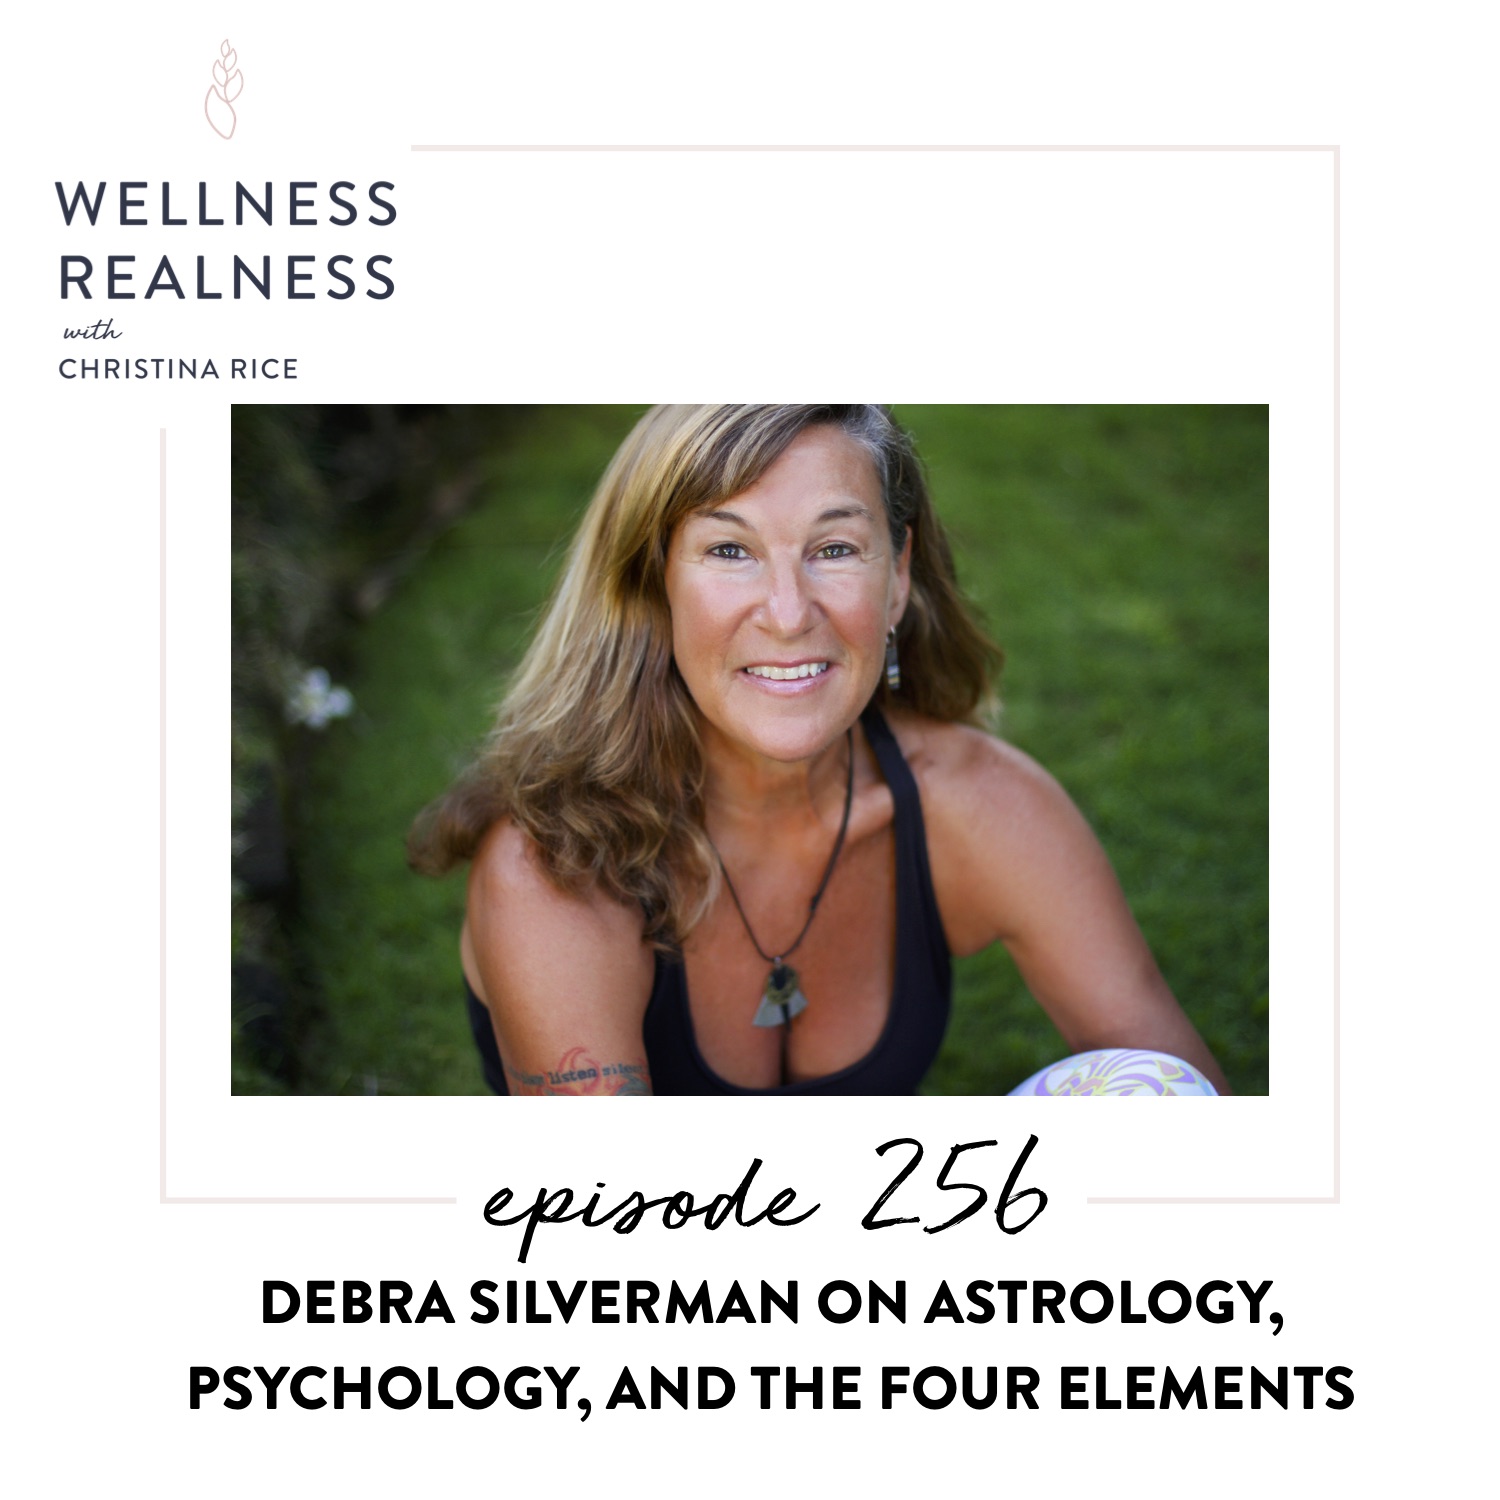 256: Debra Silverman on Astrology, Psychology, and the Four Elements